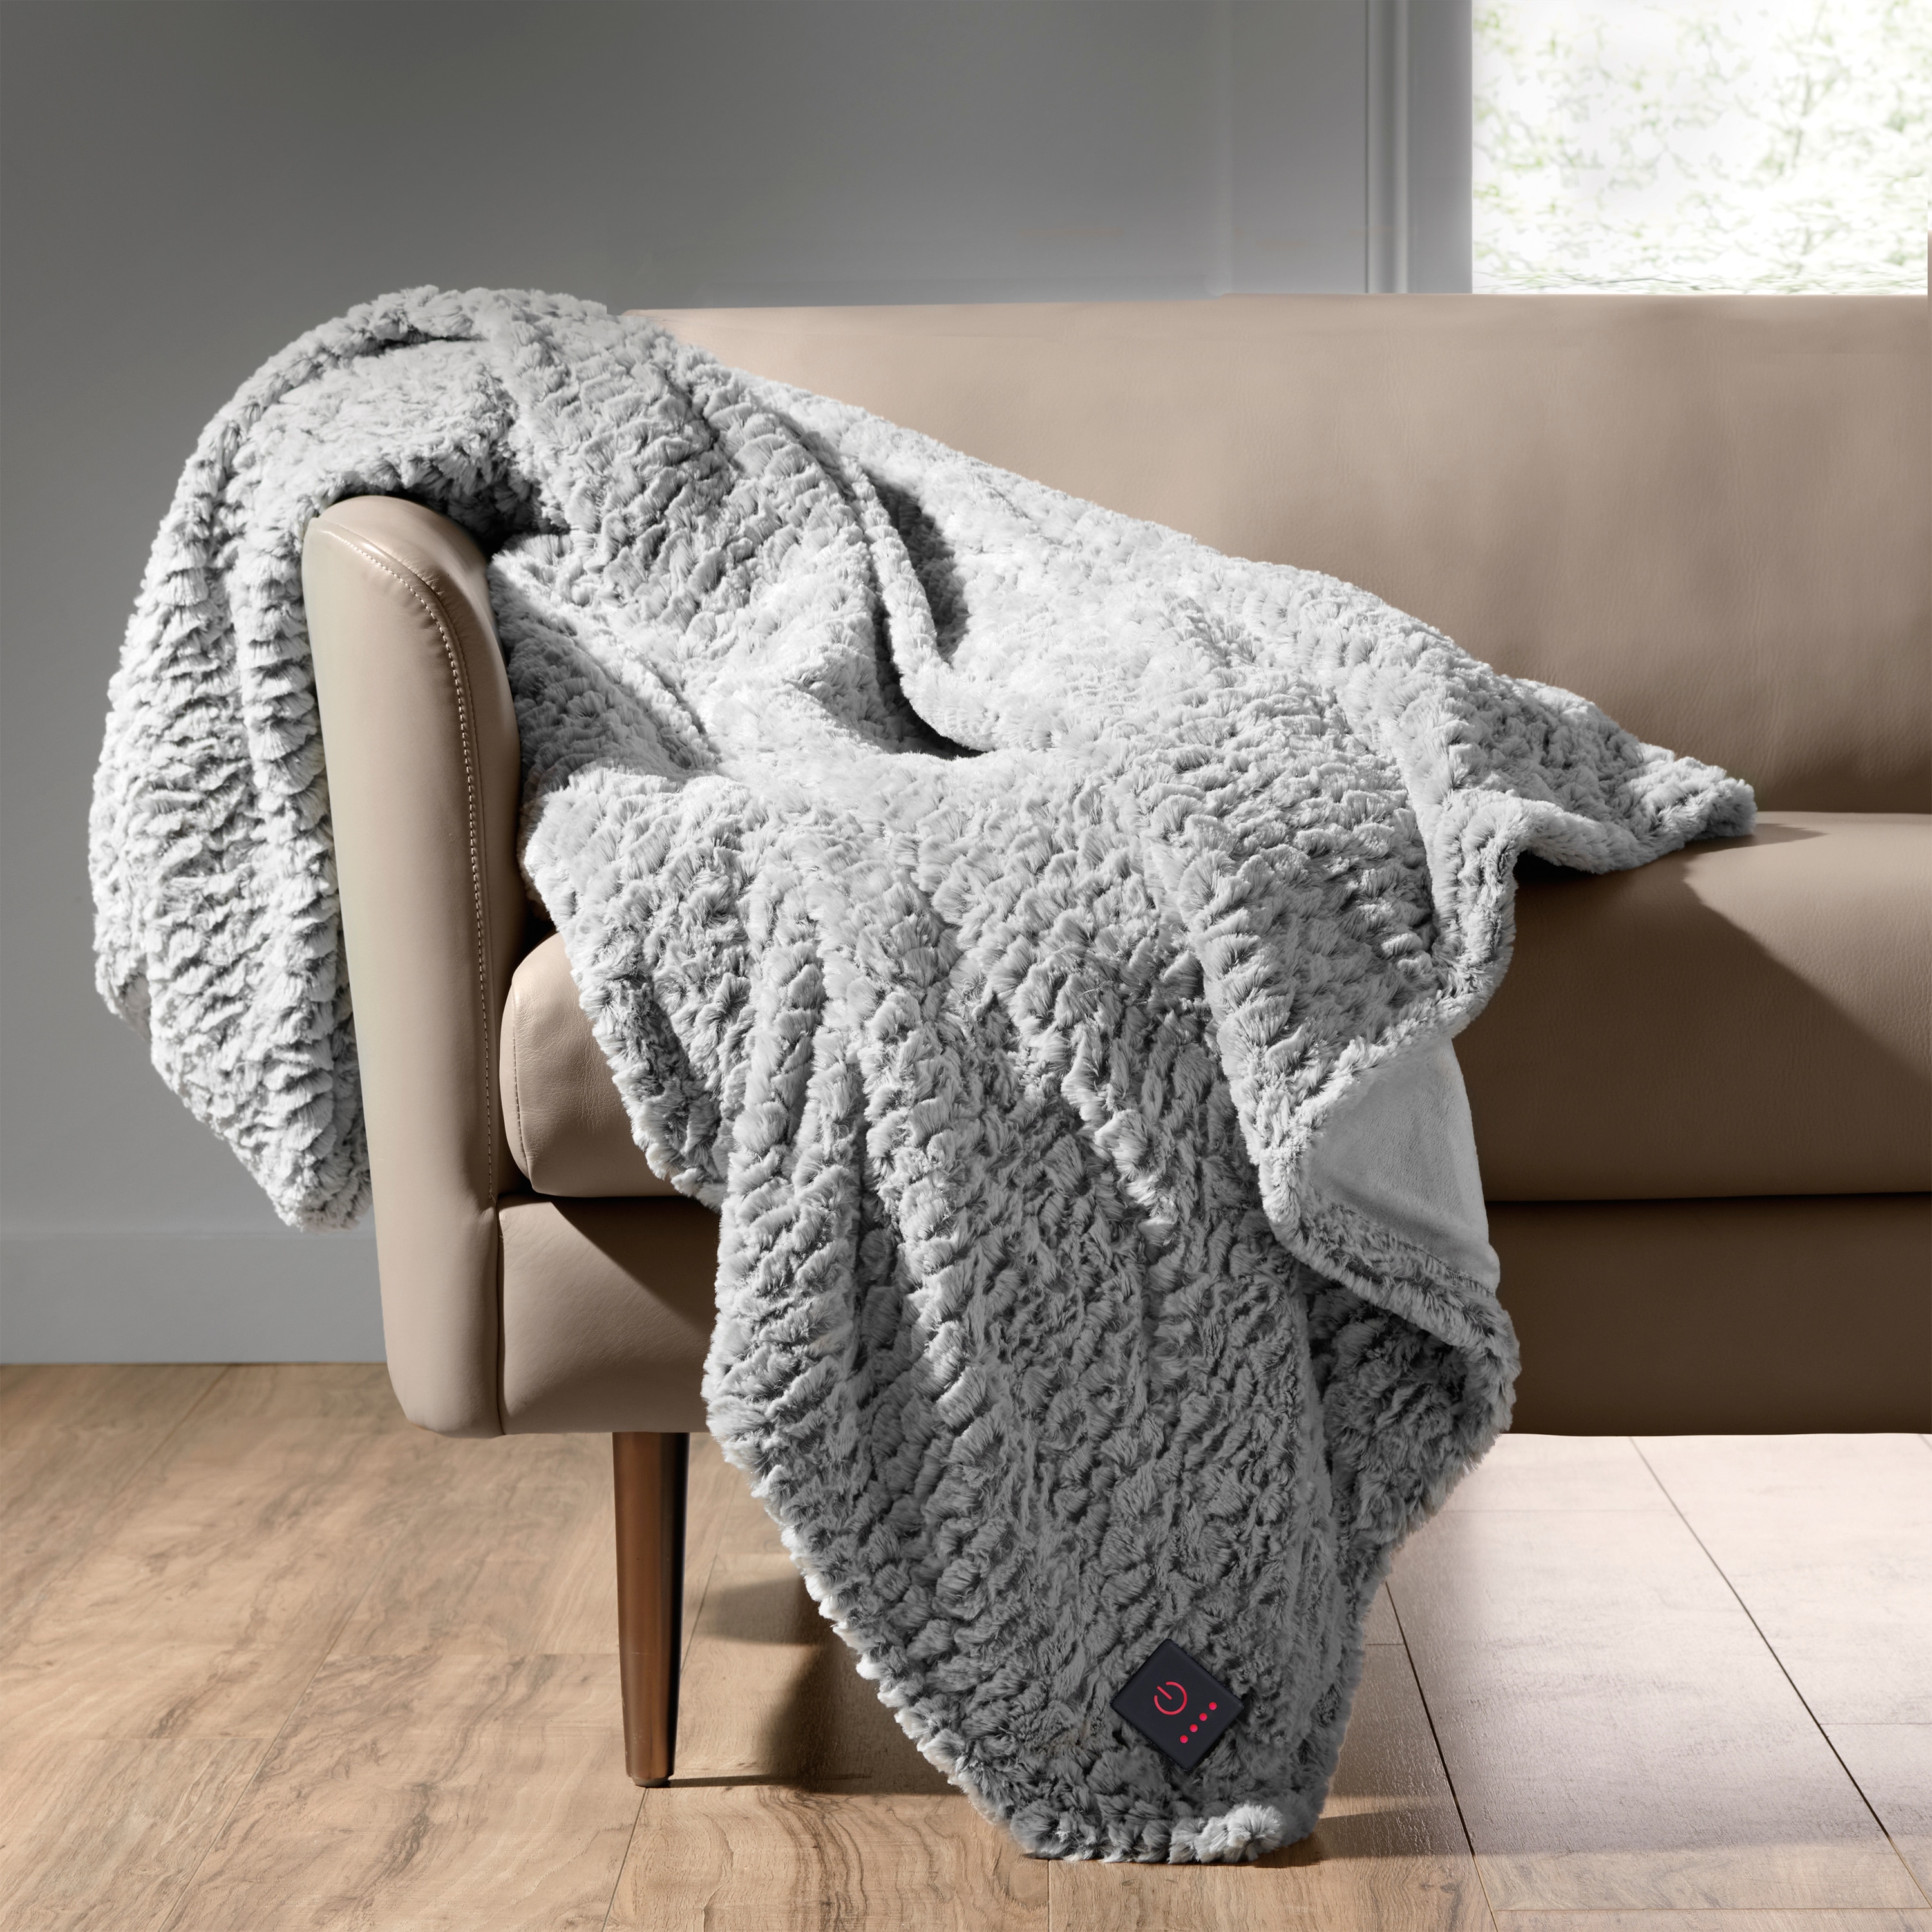 https://ak1.ostkcdn.com/images/products/is/images/direct/86ce6de4bd5832d08a5329efee22e1413aee29a9/Brookstone-Heated-Faux-Fur-Throw.jpg